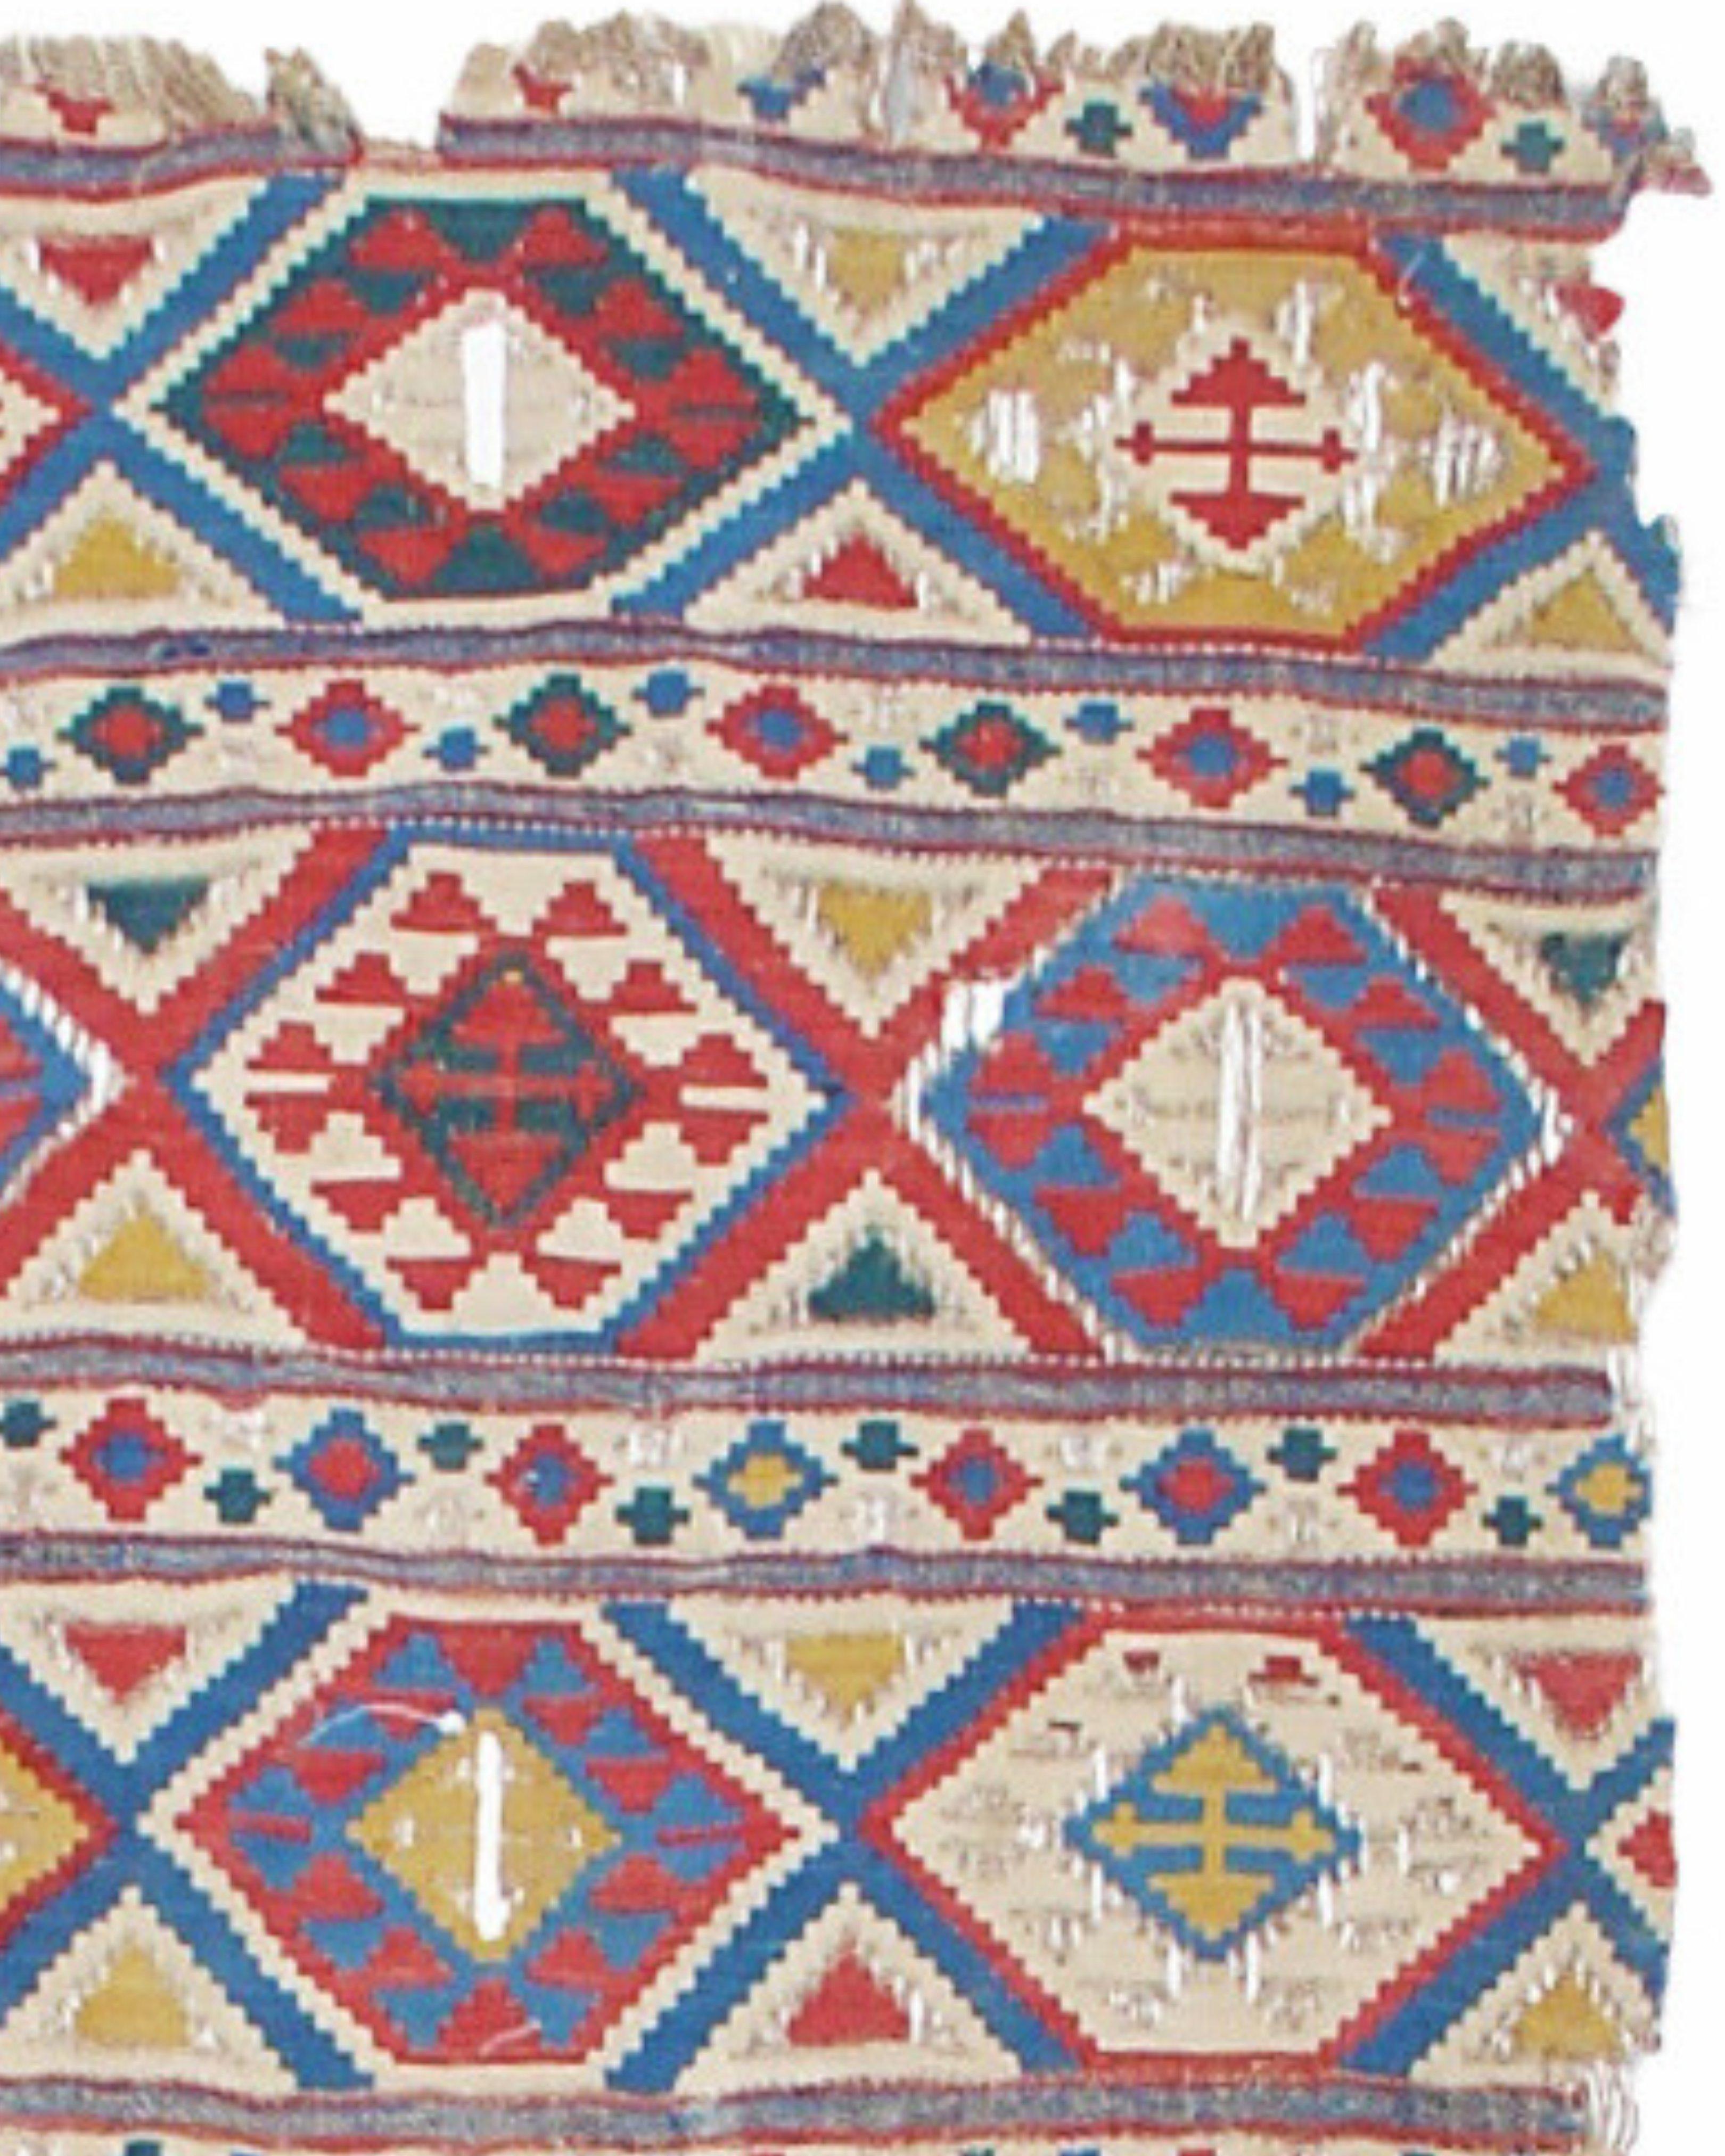 Antique Shirvan Kilim Rug, Late 19th Century

Additional Information:
Dimensions: 7'9